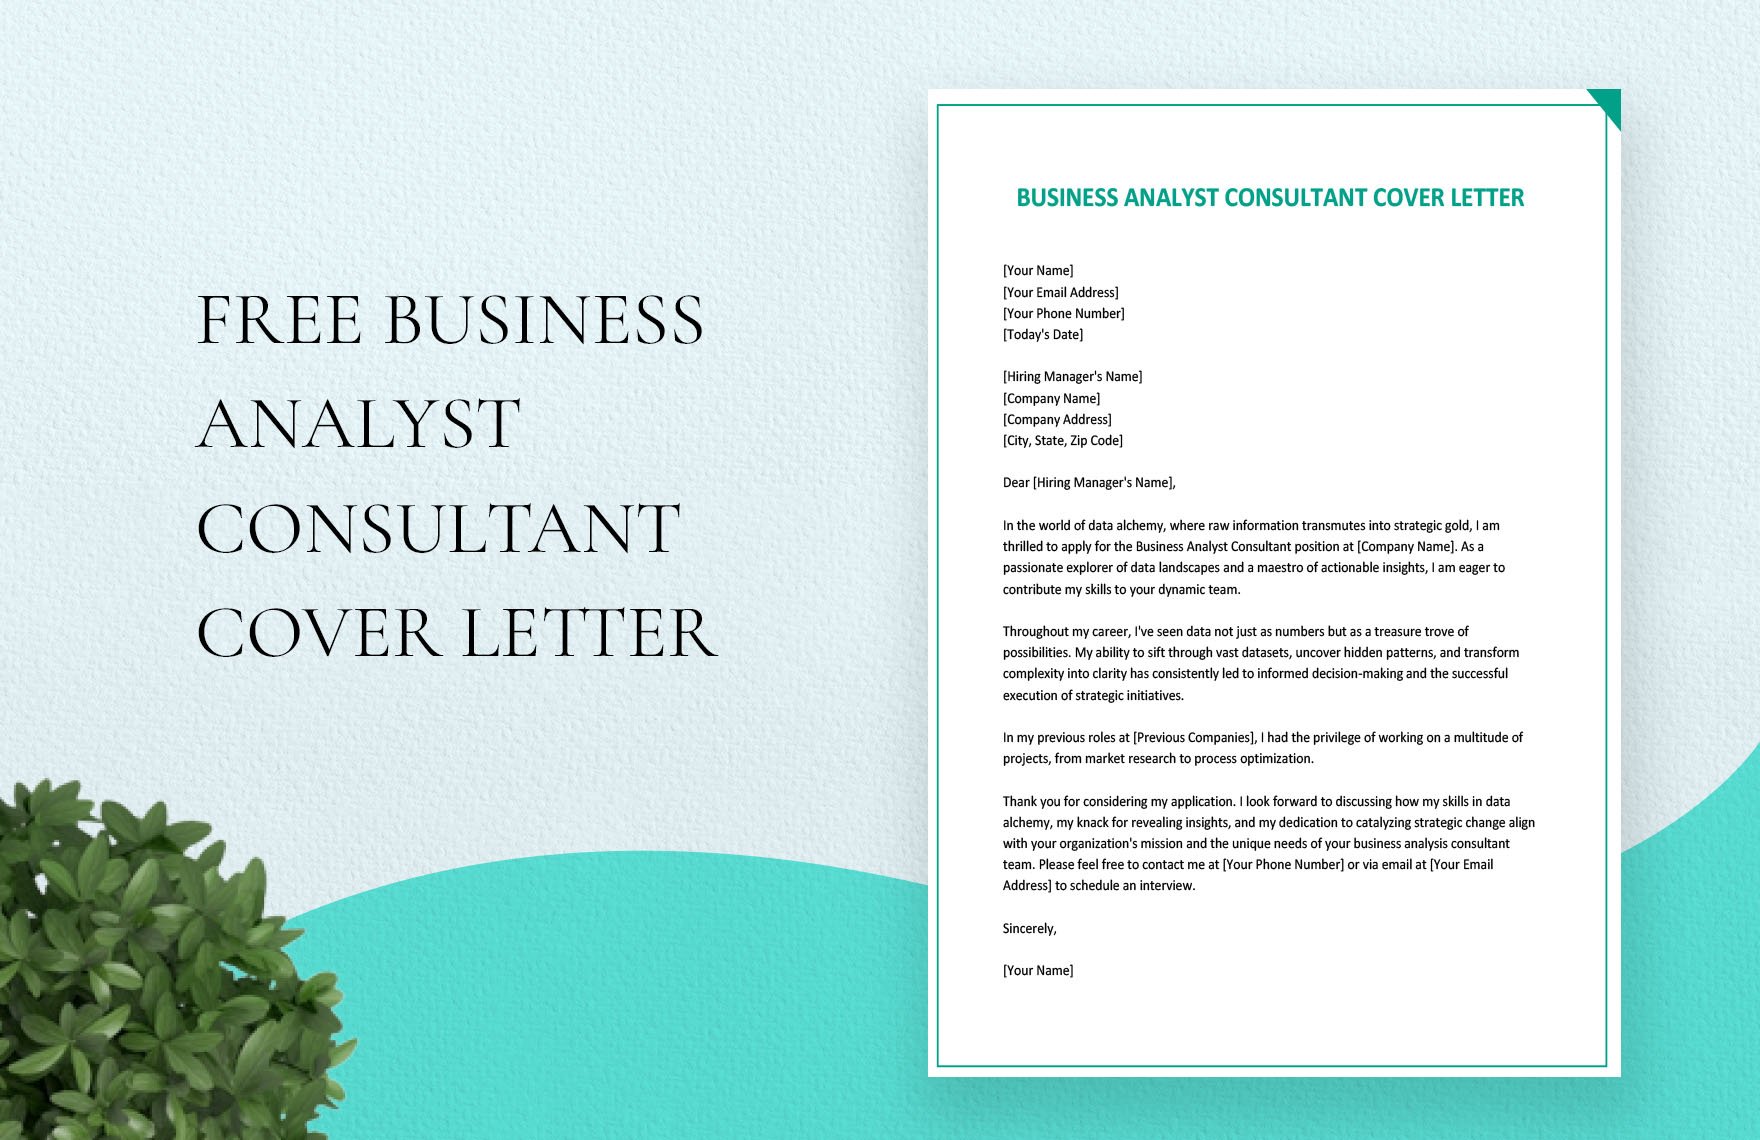 Business Analyst Consultant Cover Letter